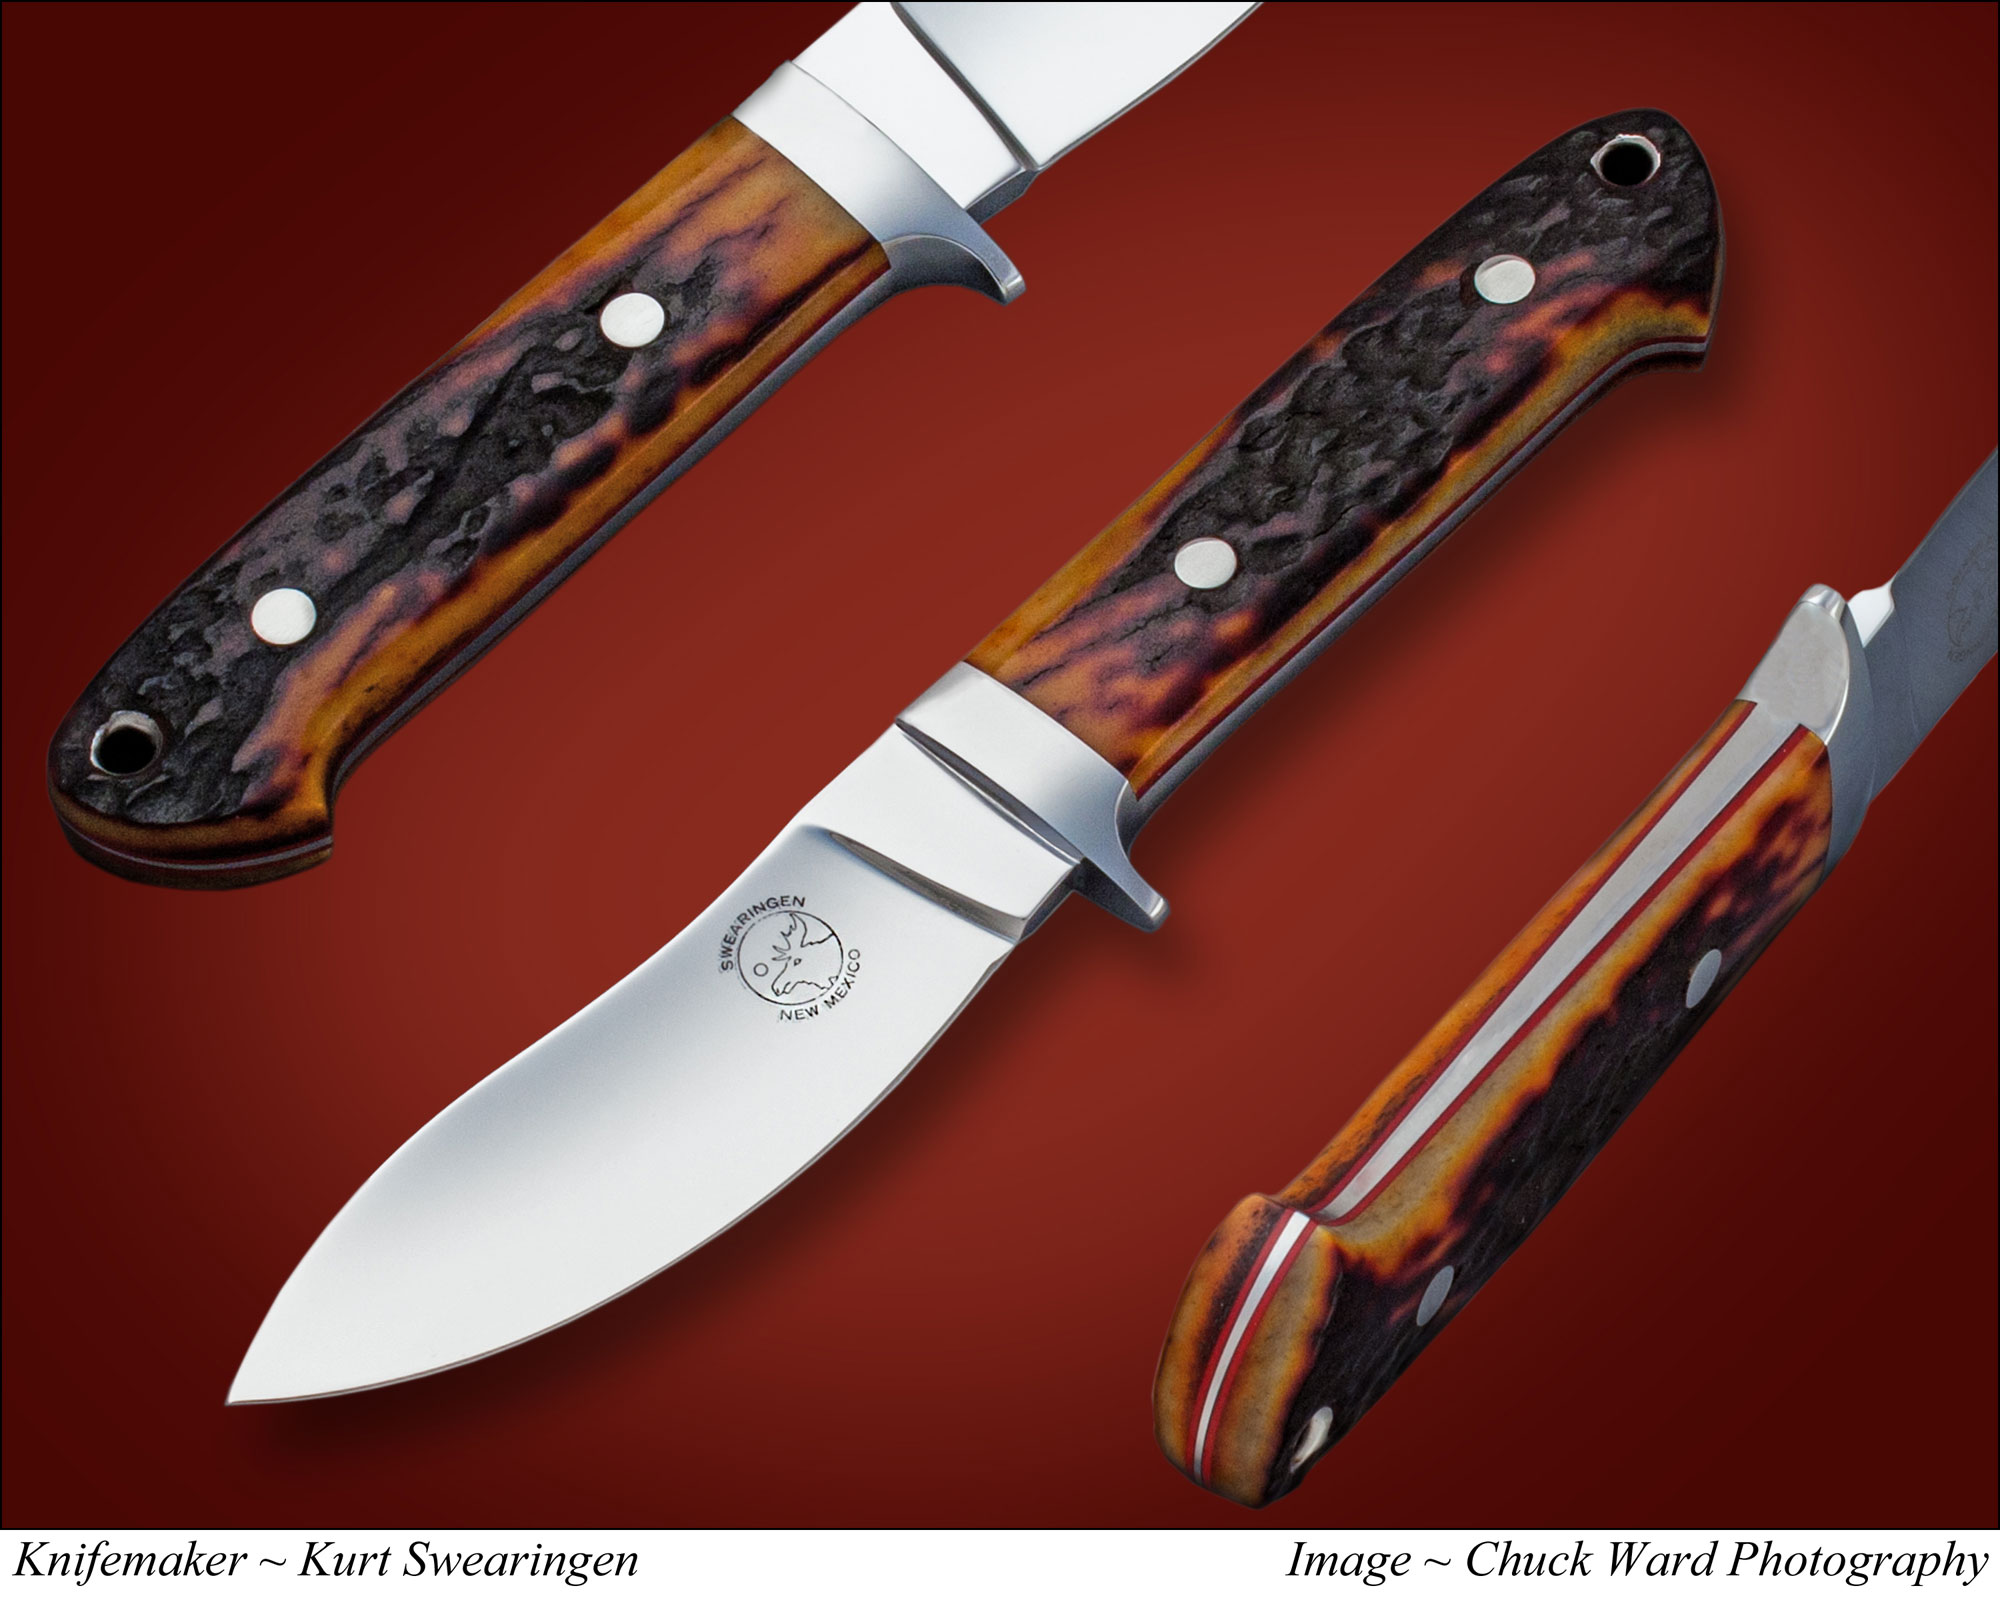 Photos: What Steels Do Custom Knifemakers Use?